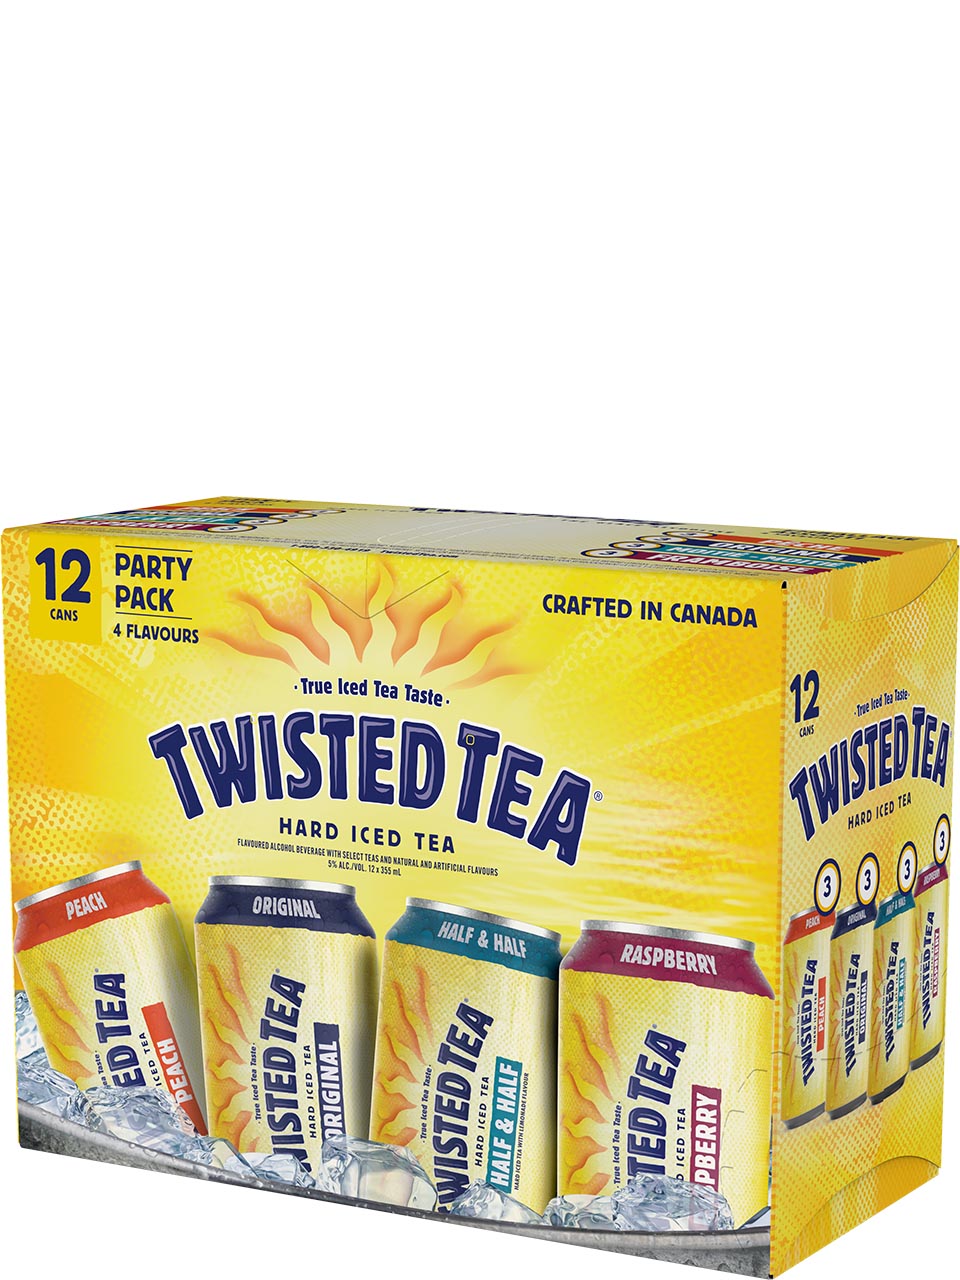 Twisted Tea Hard Iced Tea Party Pack 12 Pack Cans